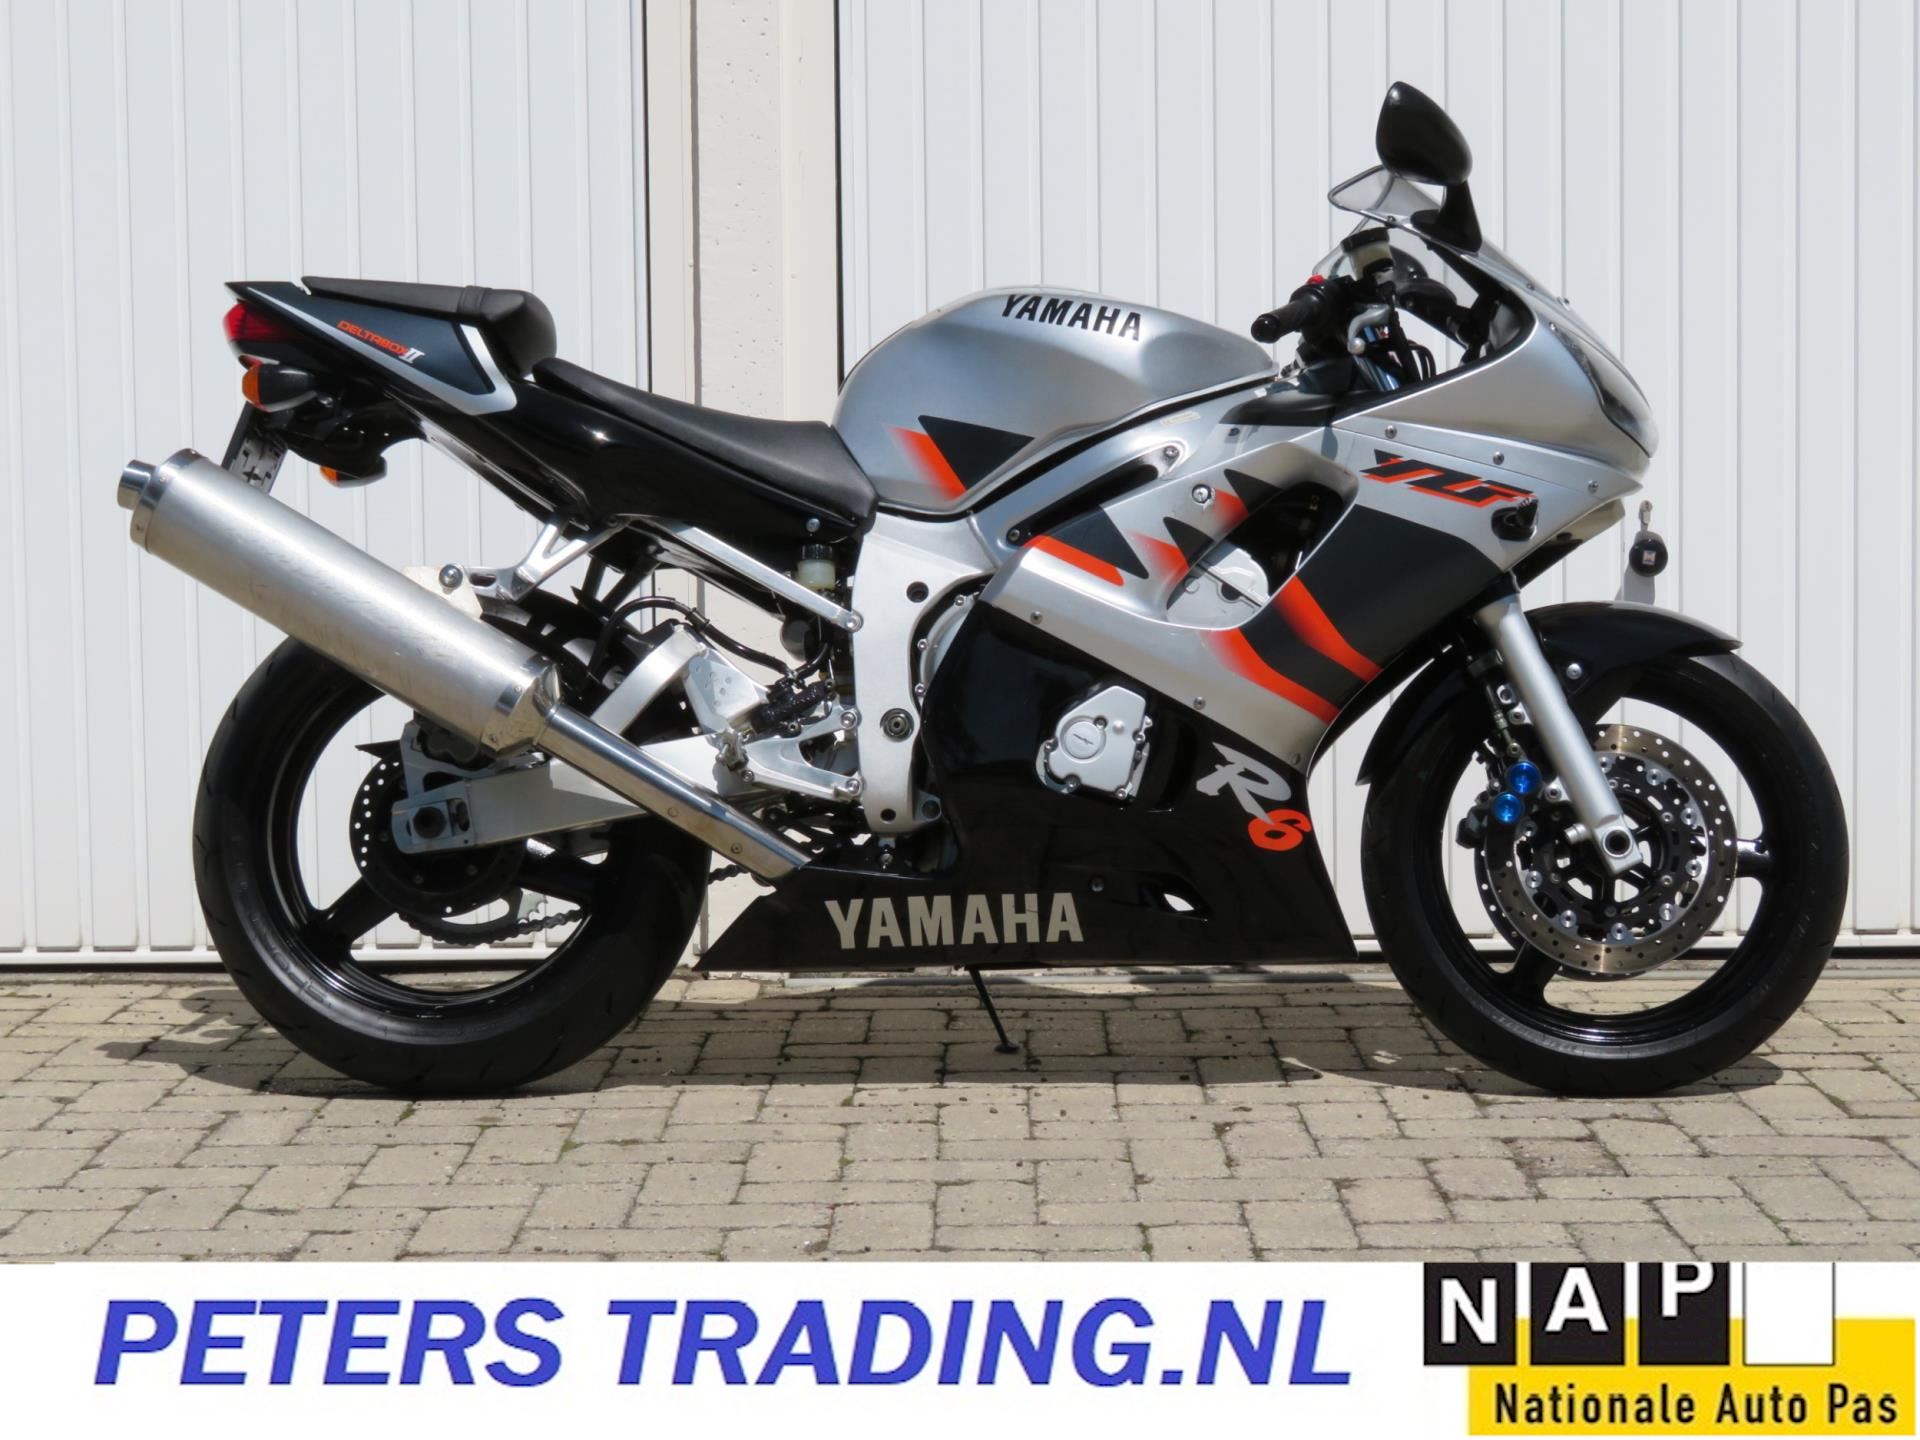 Yamaha Sport occasion - Peters Trading